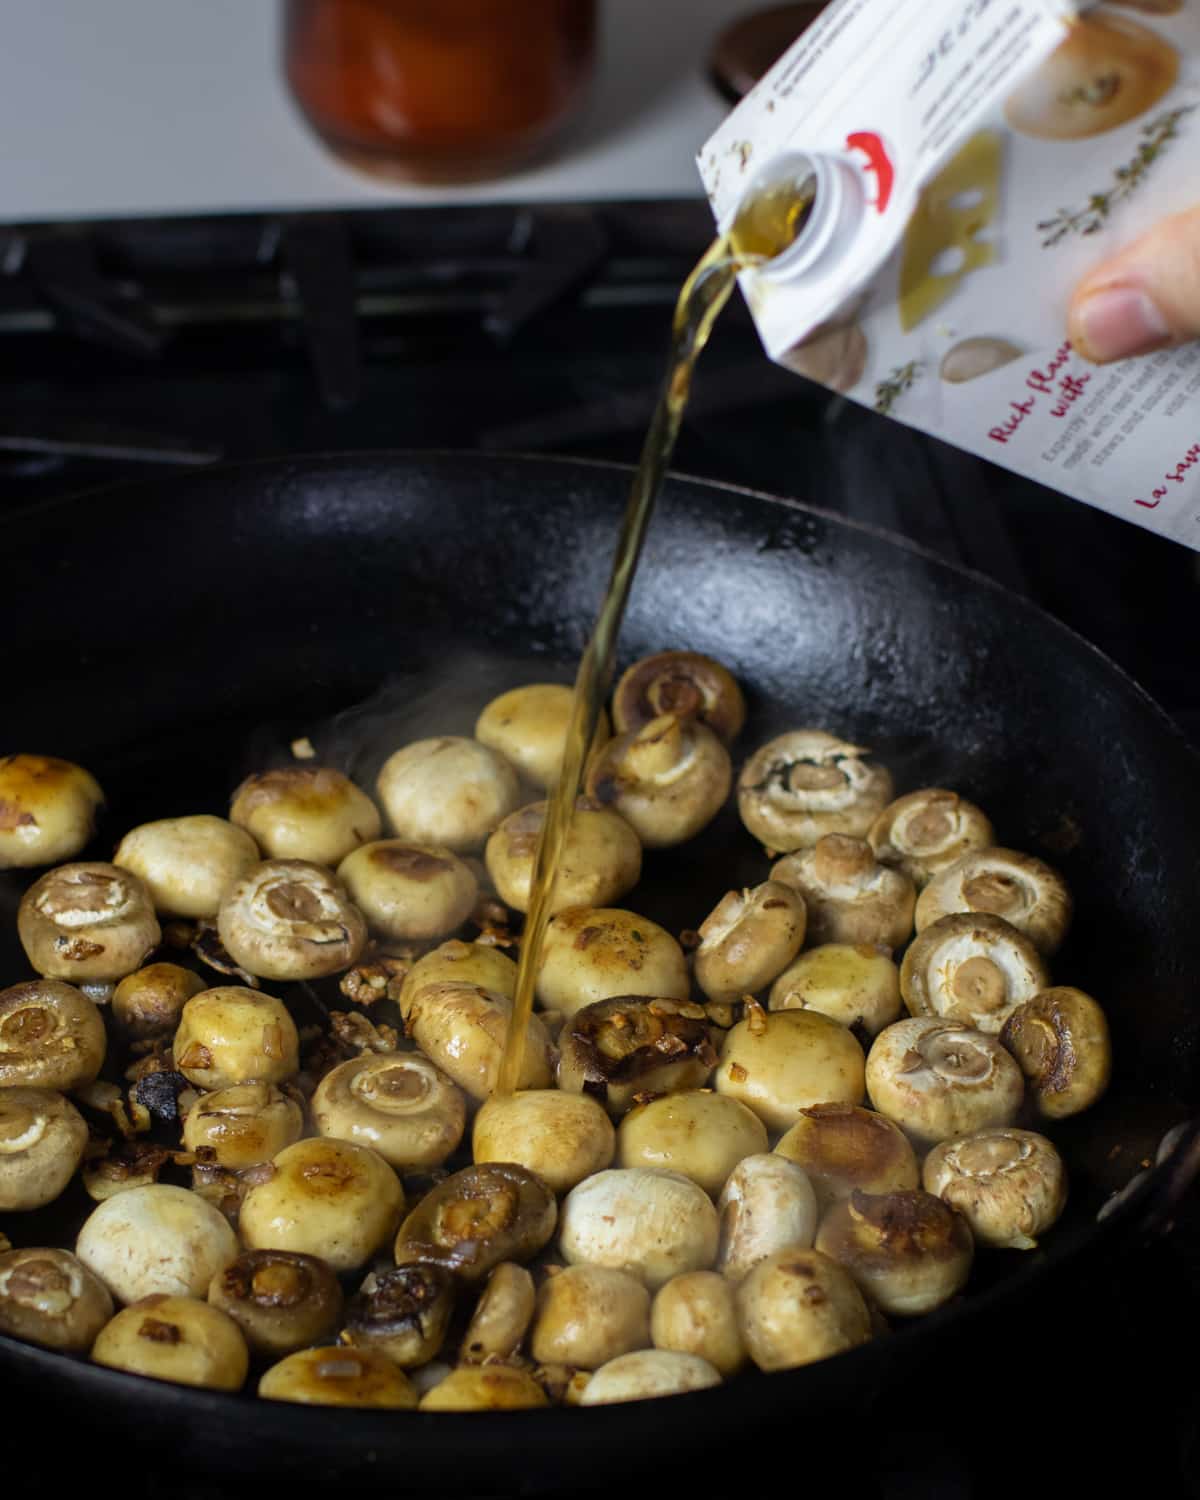 Beef broth being poured into a skillet with cooked mushrooms.